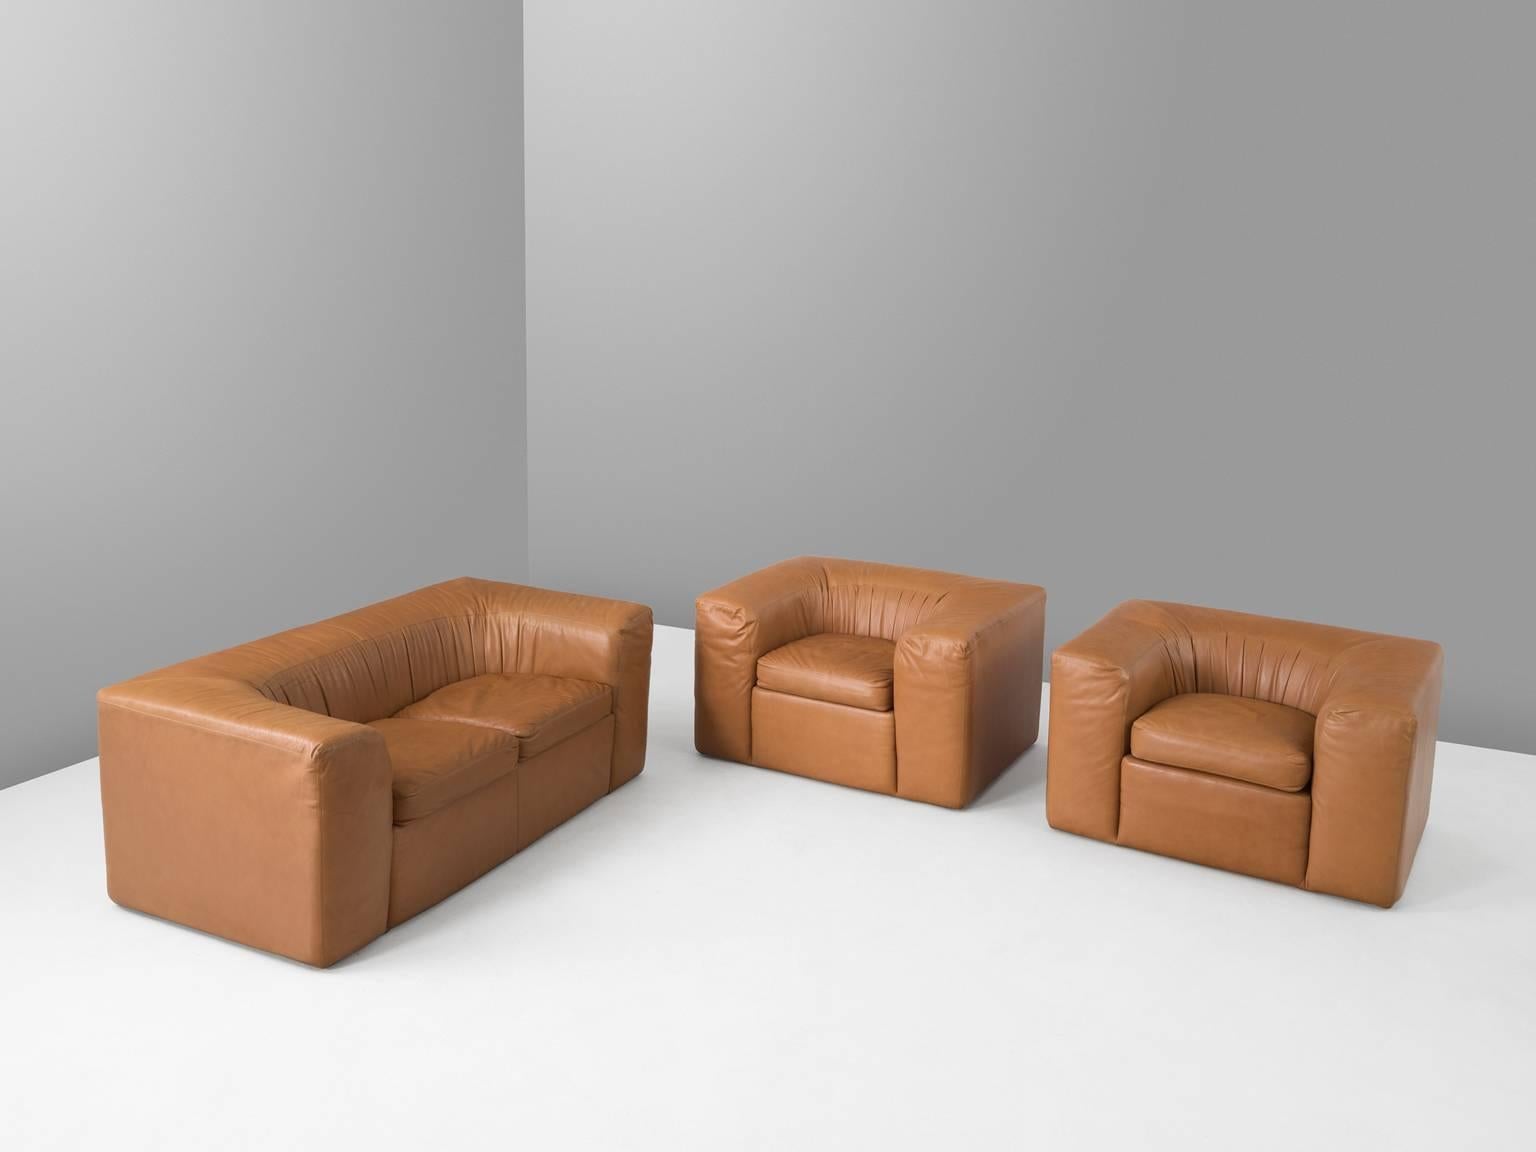 Living room set, in leather, Europe, 1970s.

Cognac leather living room set consisting of two lounge chairs and one sofa. Designed in the style of Saporiti and De Sede. Highly comfortable living room set in cognac leather. The design is